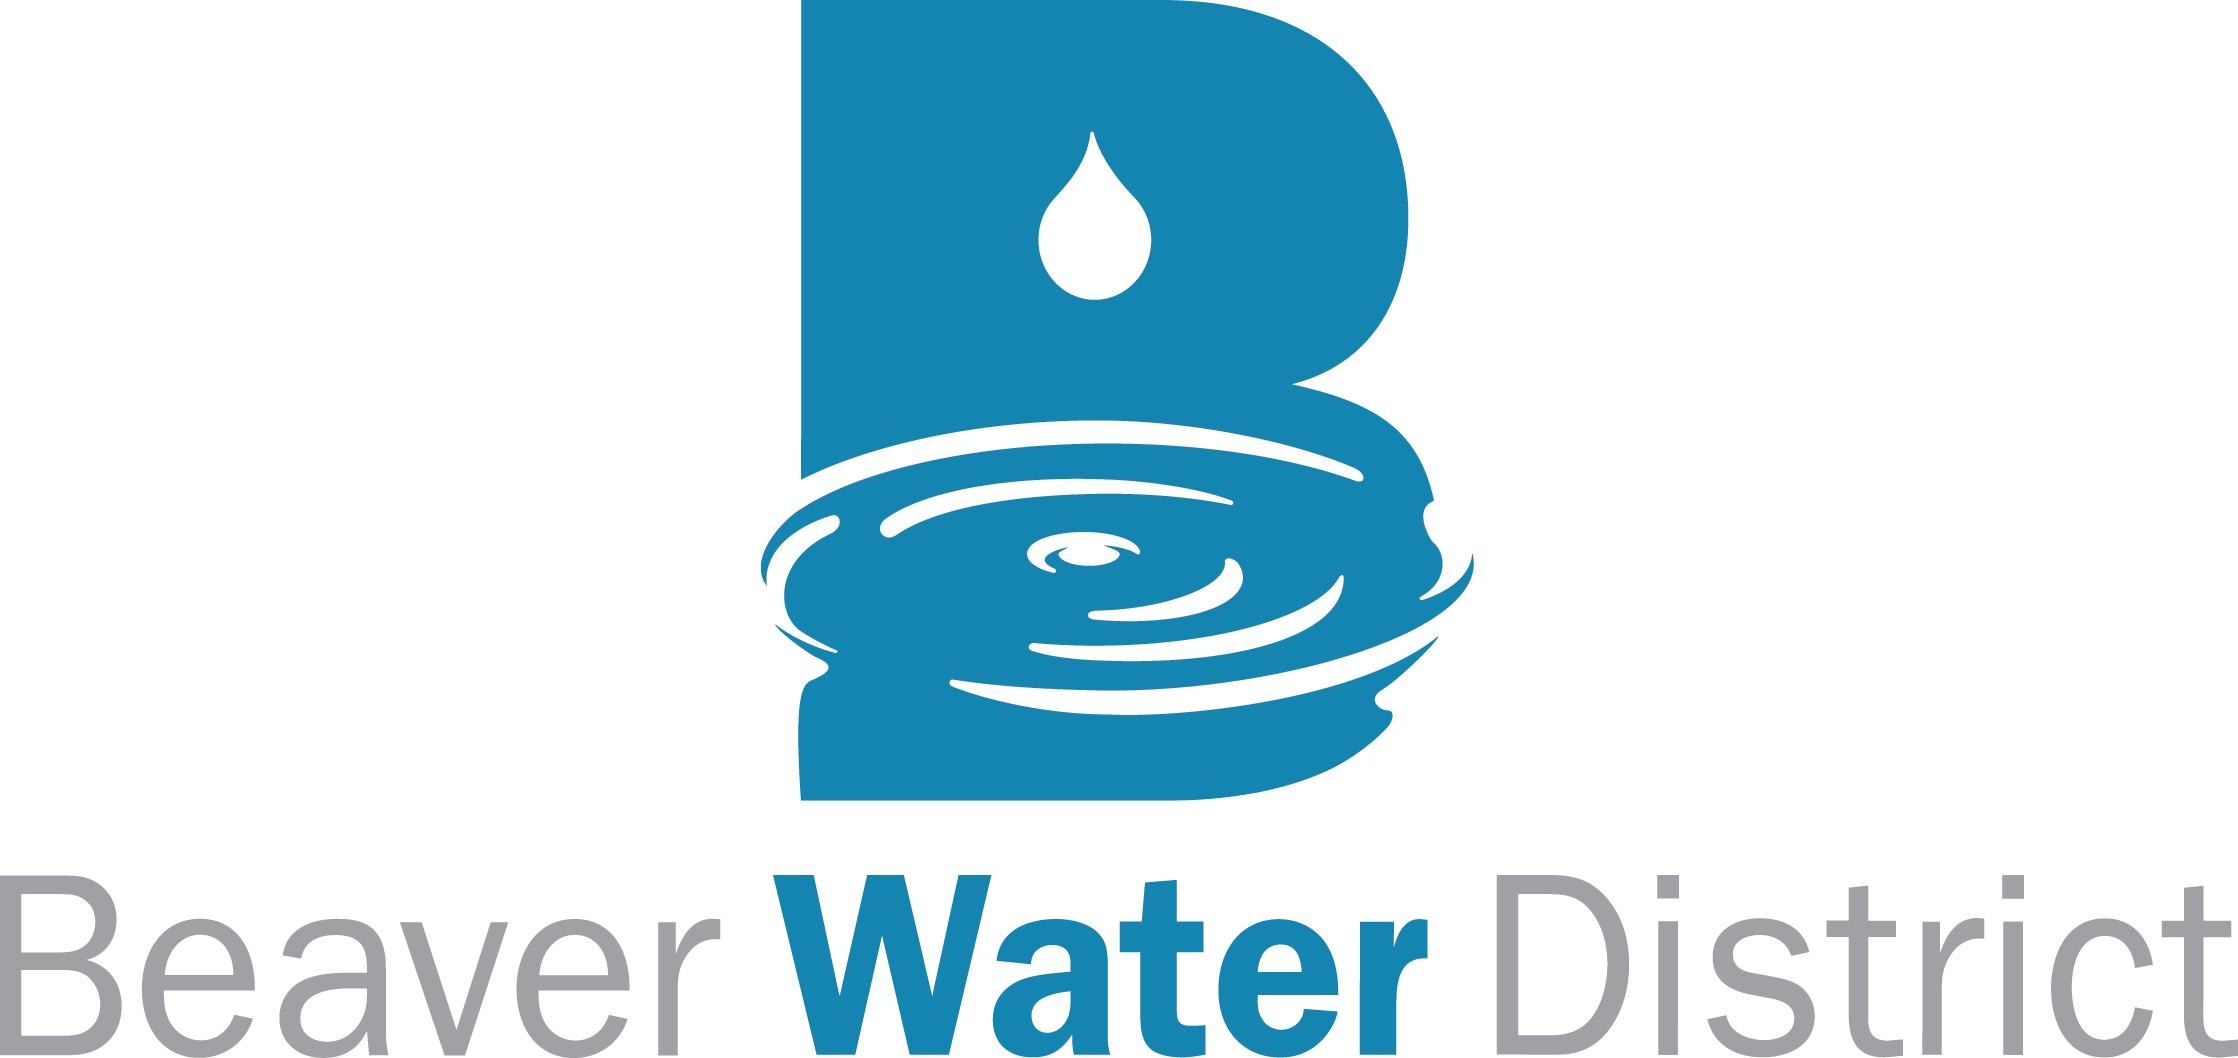 Beaver Water District